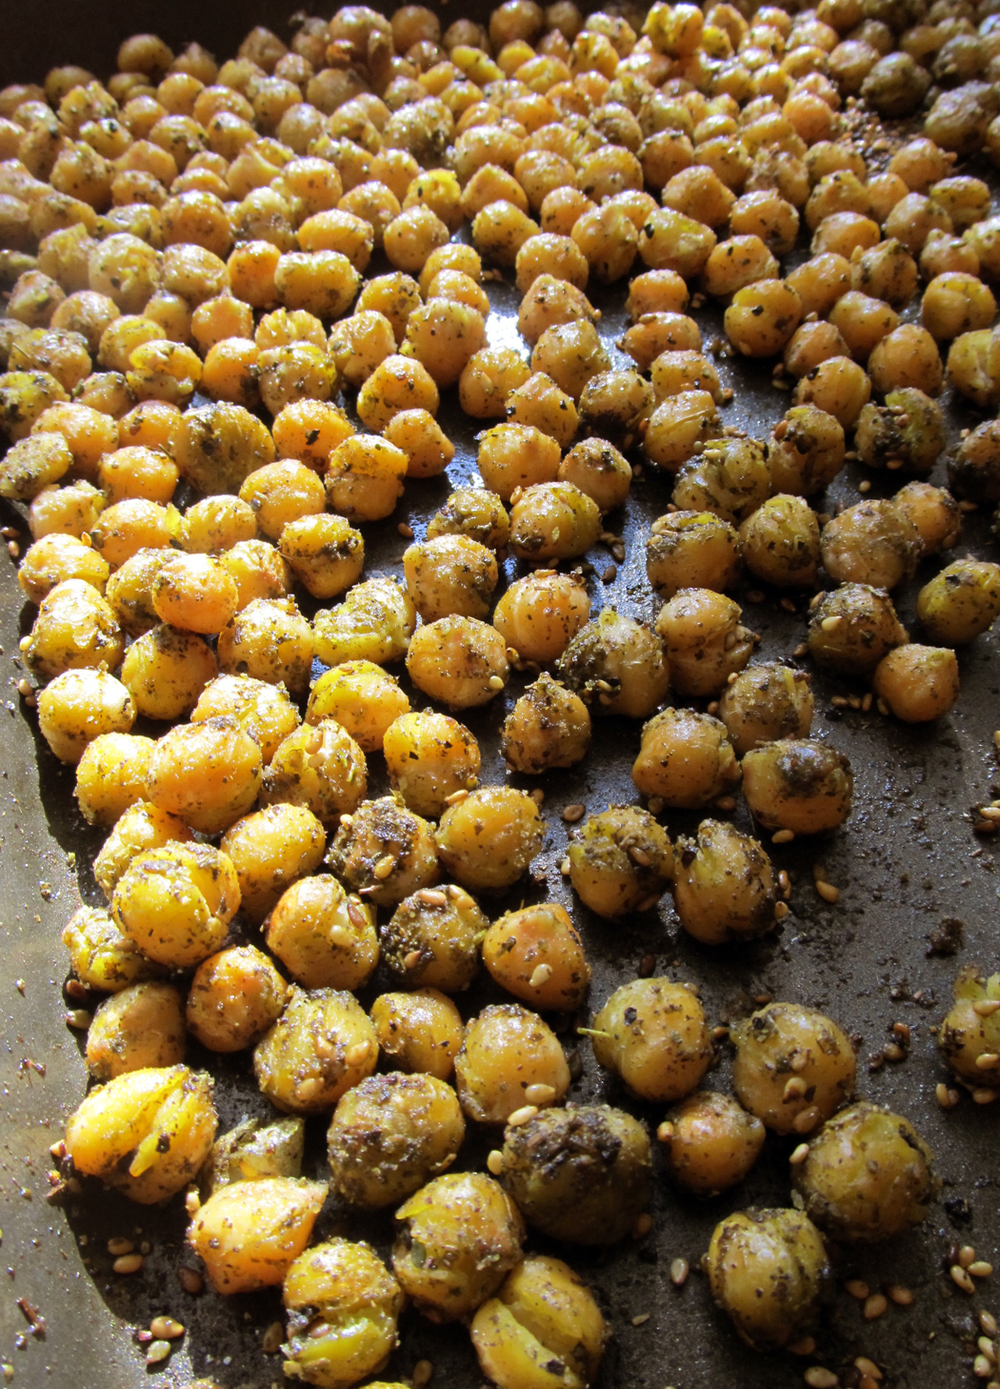 Roasted chickpeas are also a tasty, savory and portable high-protein snack. 